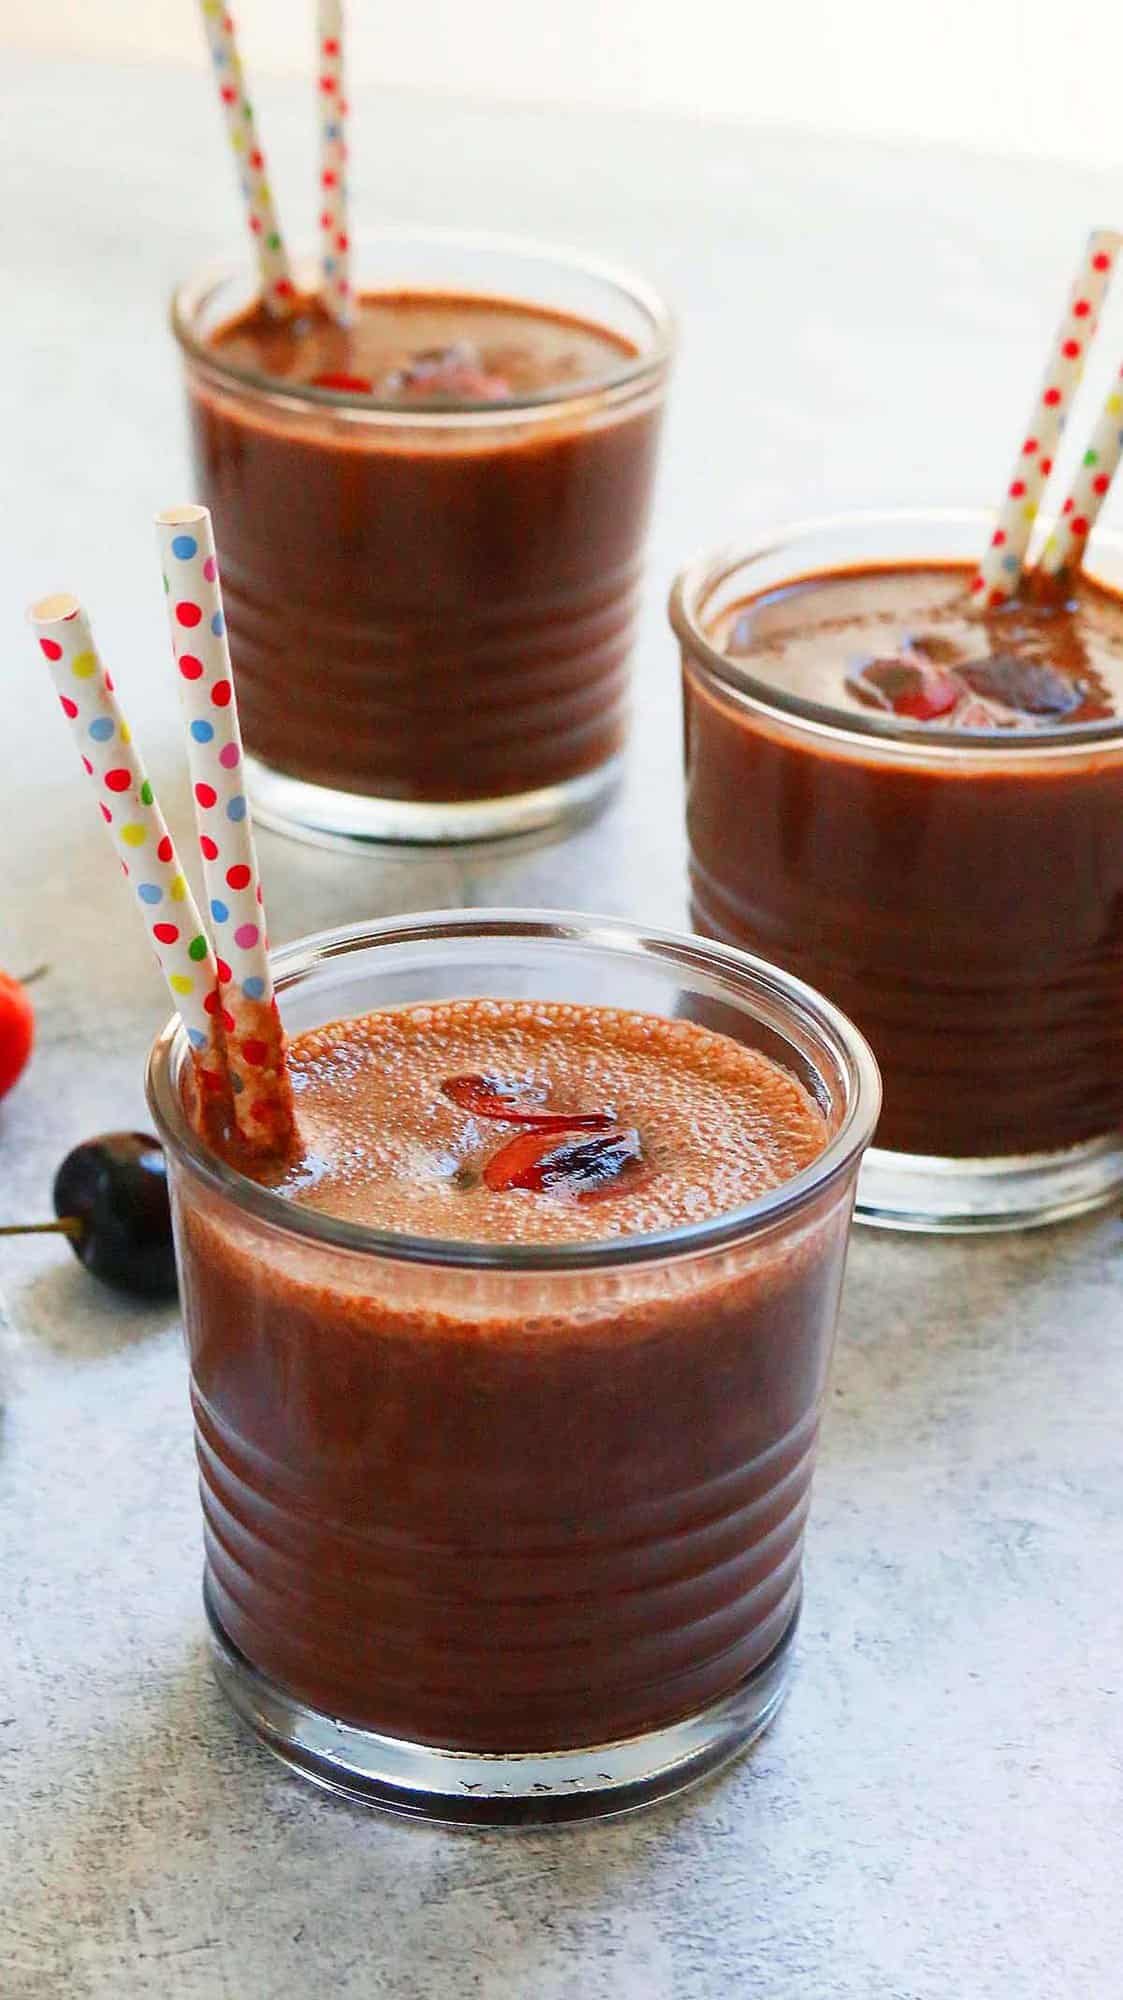 3 glasses filled with chocolate smoothie topped with cherries.